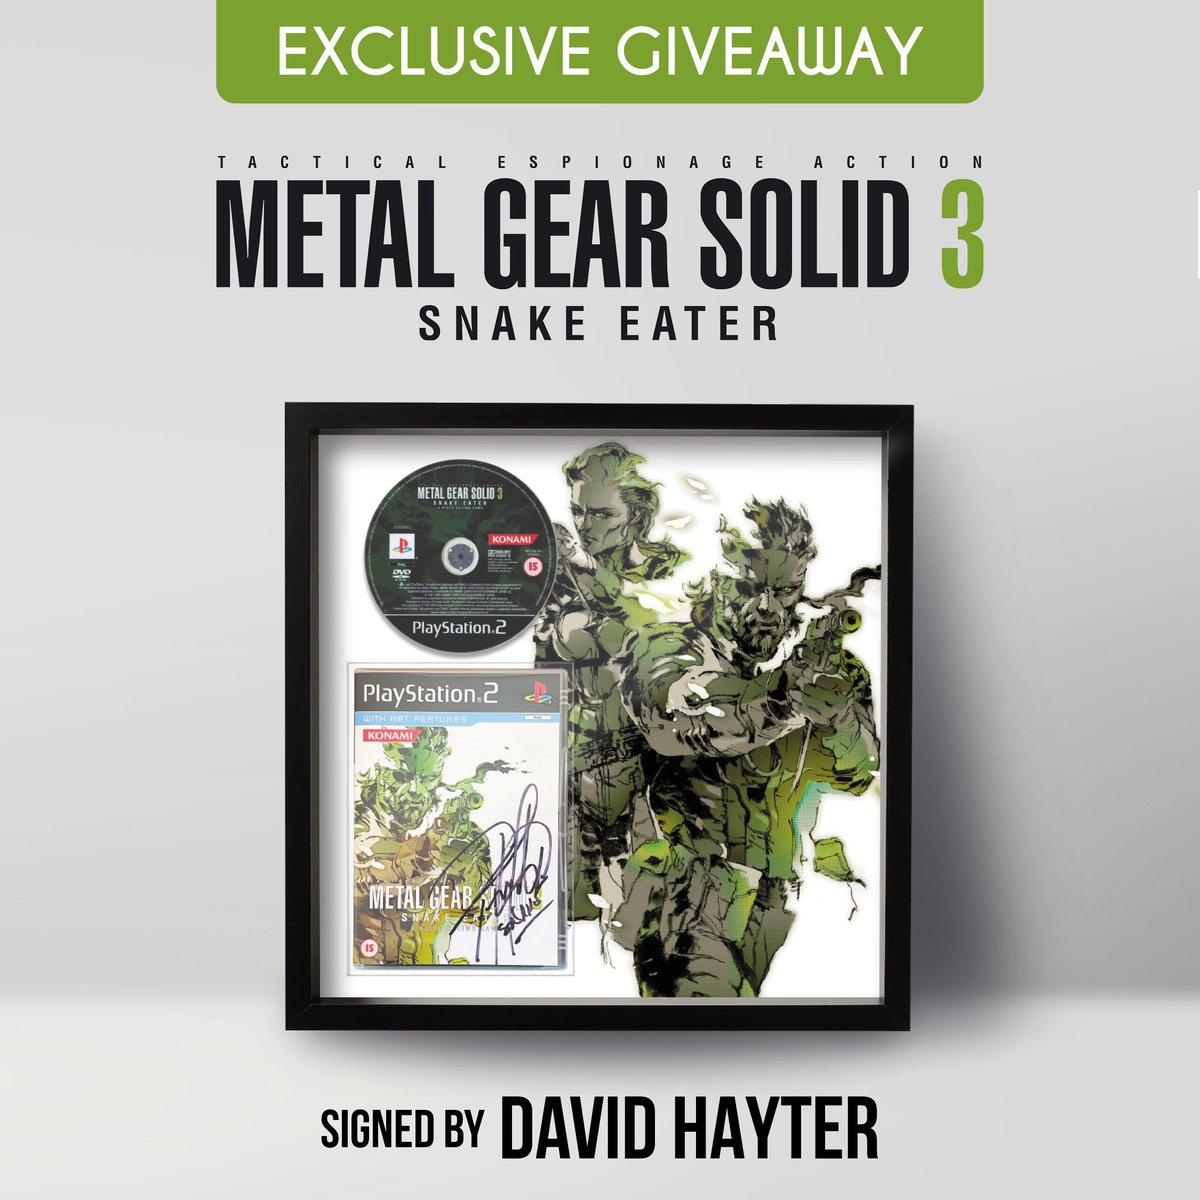 ❗️EXCLUSIVE GIVEAWAY❗️ I have a framed copy of #MetalGearSolid3, signed by the legendary Snake himself, @DavidBHayter! To enter: 👉🏼 Follow @frameagame 👉🏼 Retweet this tweet That’s it! 😎 Open to UK, US and Europe. Winner drawn 16.12.22. Good luck everyone!